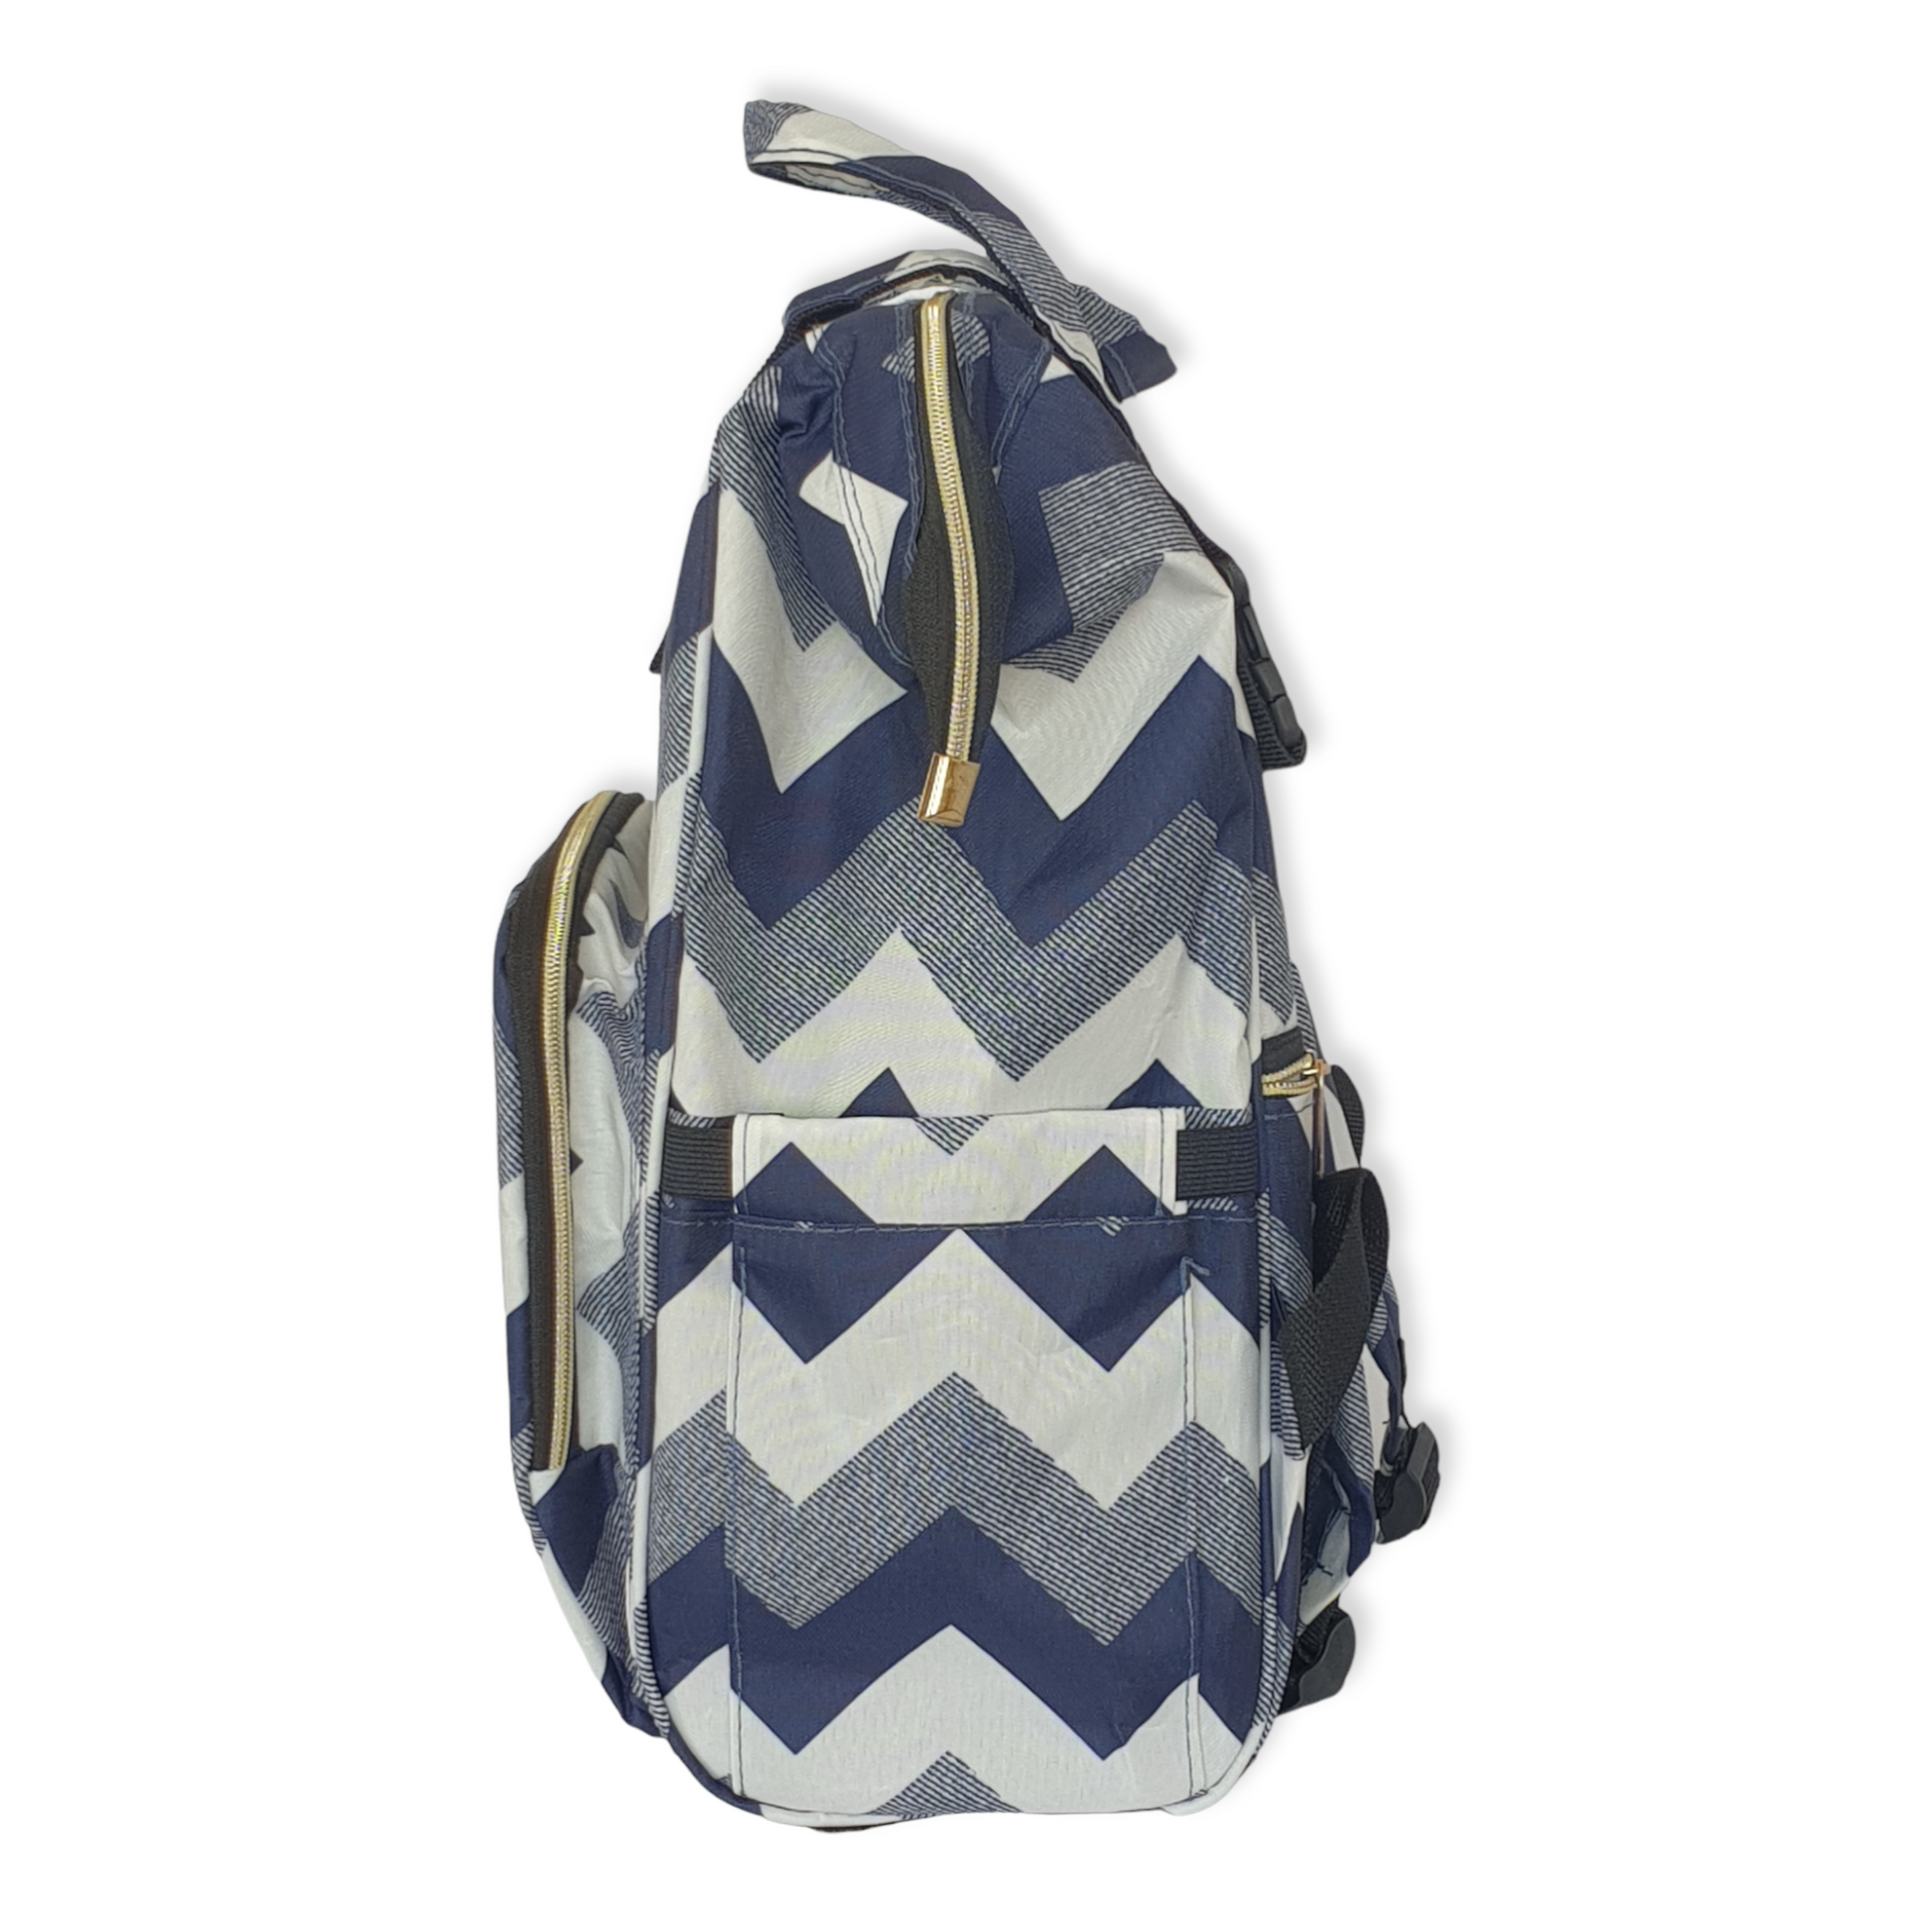 Blue Zigzag Pattern Mommy Bag-Bag, Bags, Blue, catbabygear, catbag, Changing, Diapers, Maternity, Nappy, Nursery, Travel-Safe Line-[Too Twee]-[Tootwee]-[baby]-[newborn]-[clothes]-[essentials]-[toys]-[Lebanon]